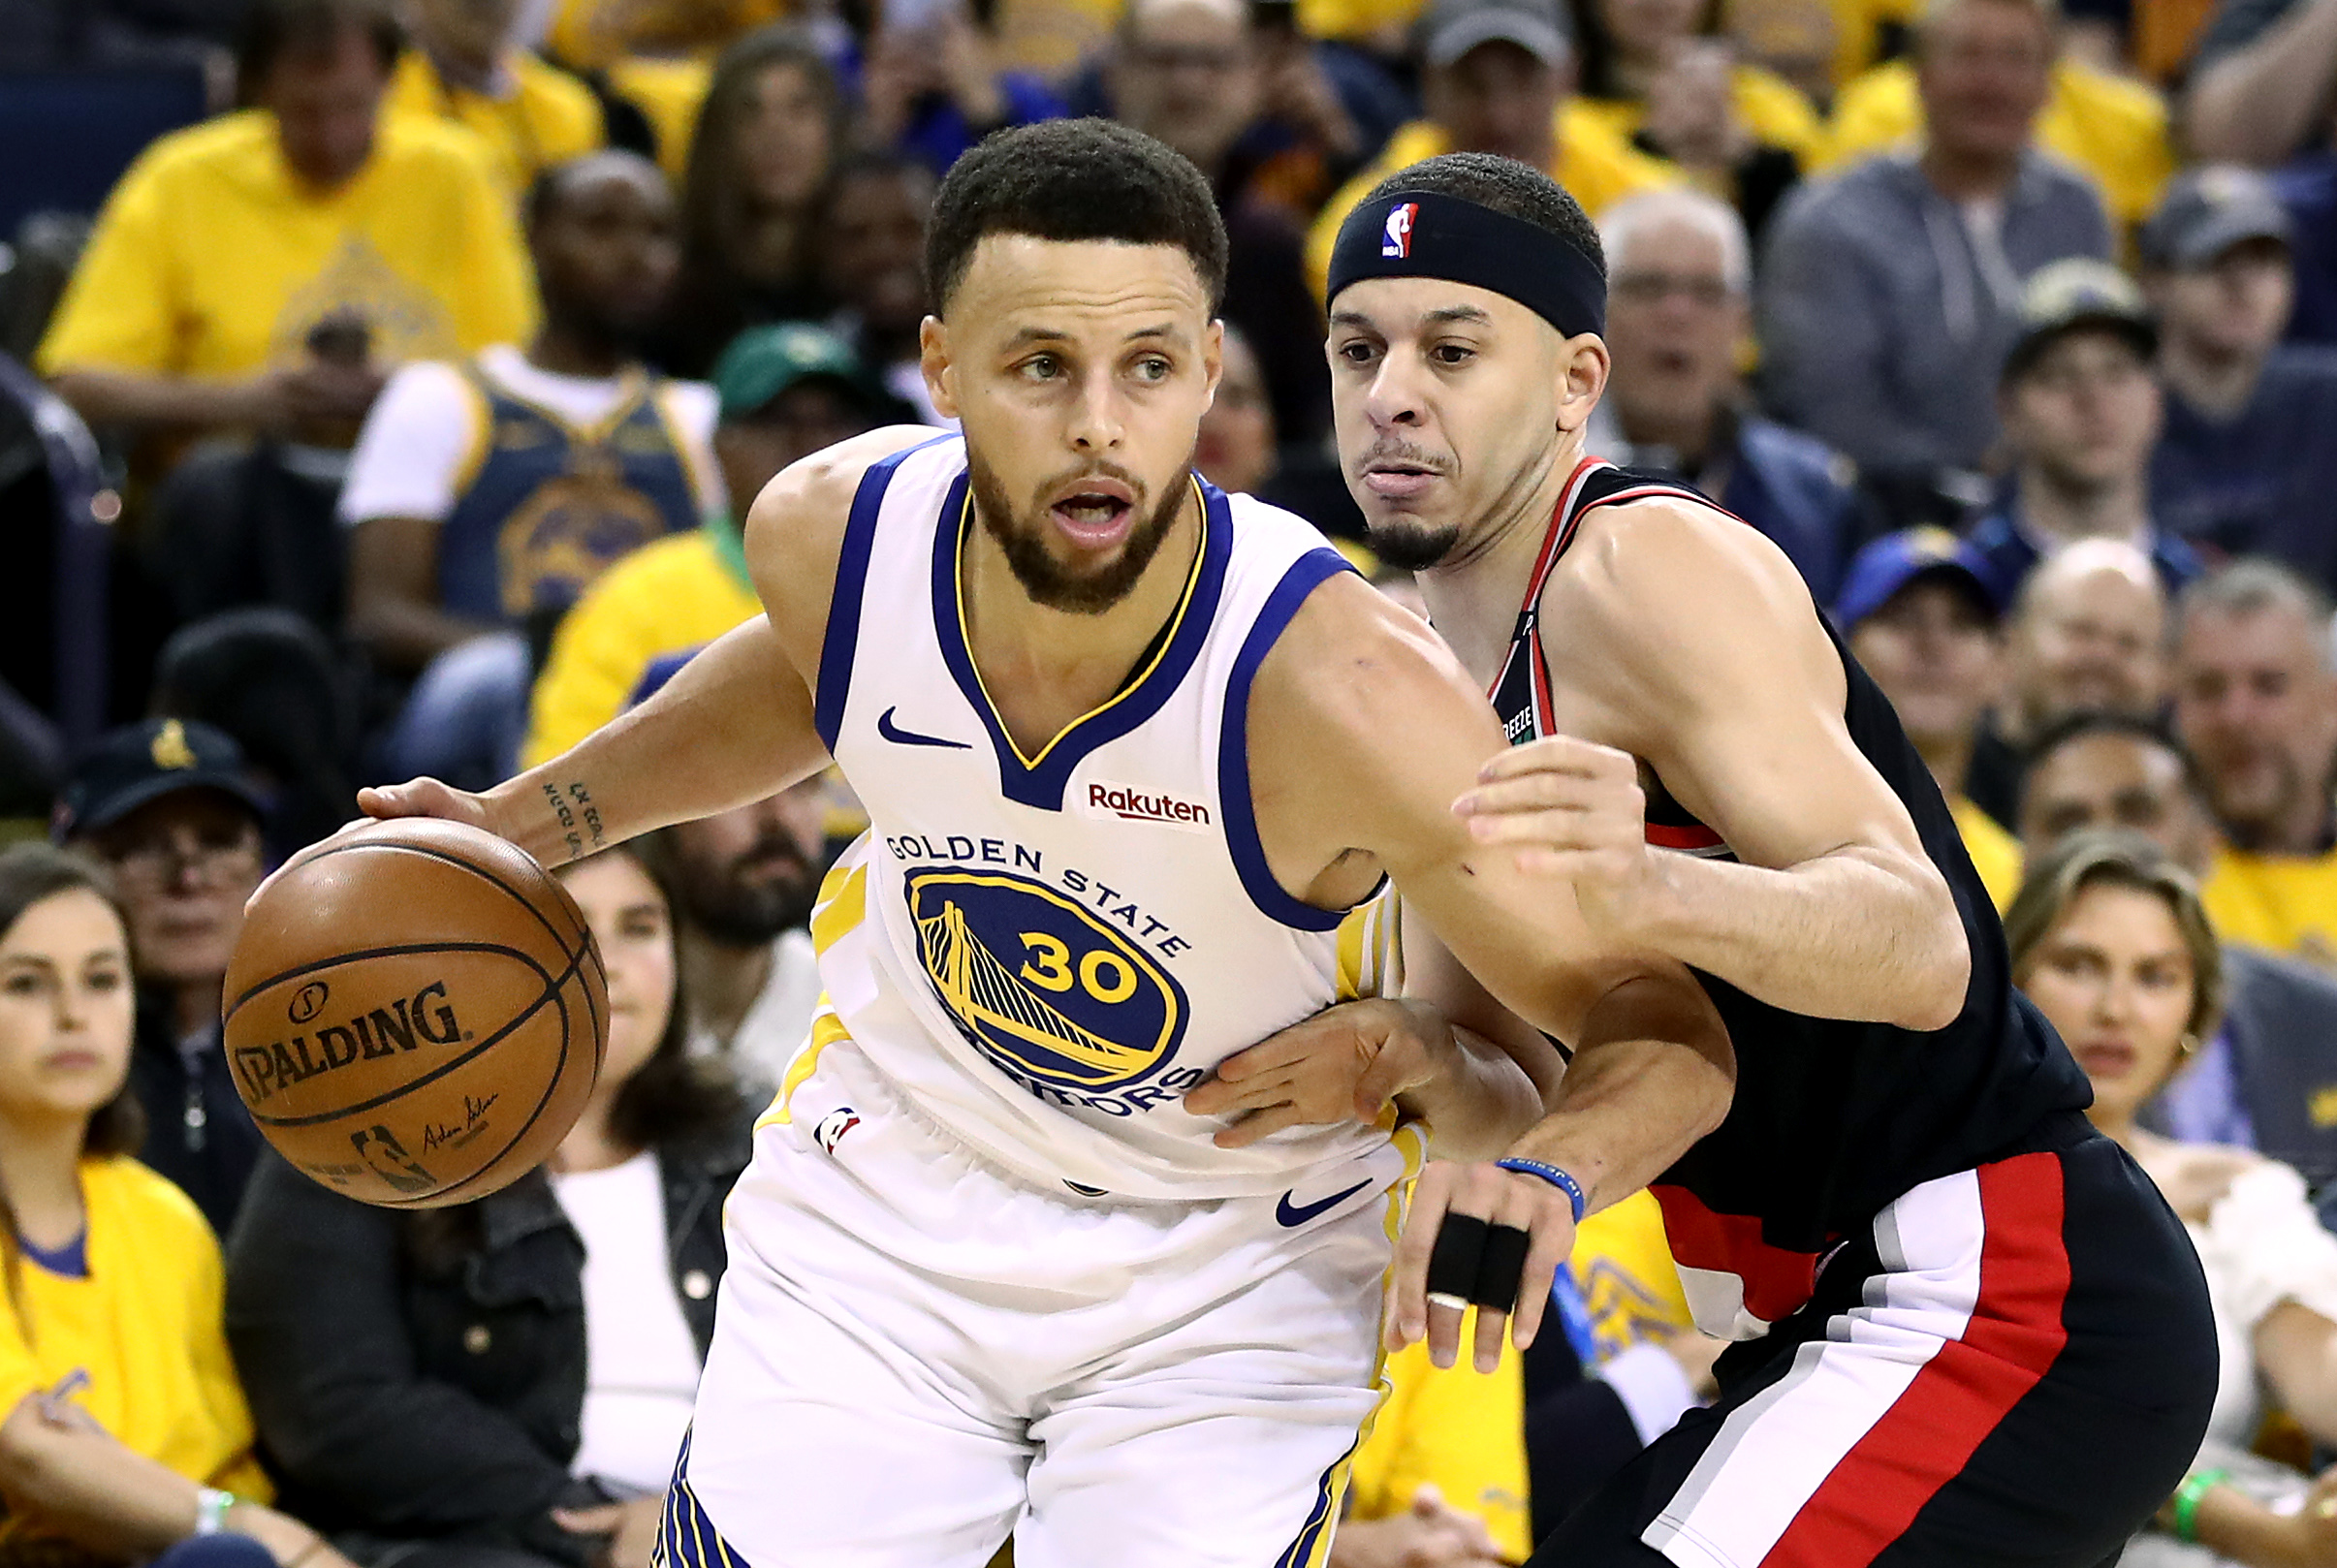 PHOTO: Seth Curry #31 of the Portland Trail Blazers defends Stephen Curry #30 of the Golden State Warriors during game one of the NBA Western Conference Finals at ORACLE Arena, May 14, 2019, in Oakland, Calif.